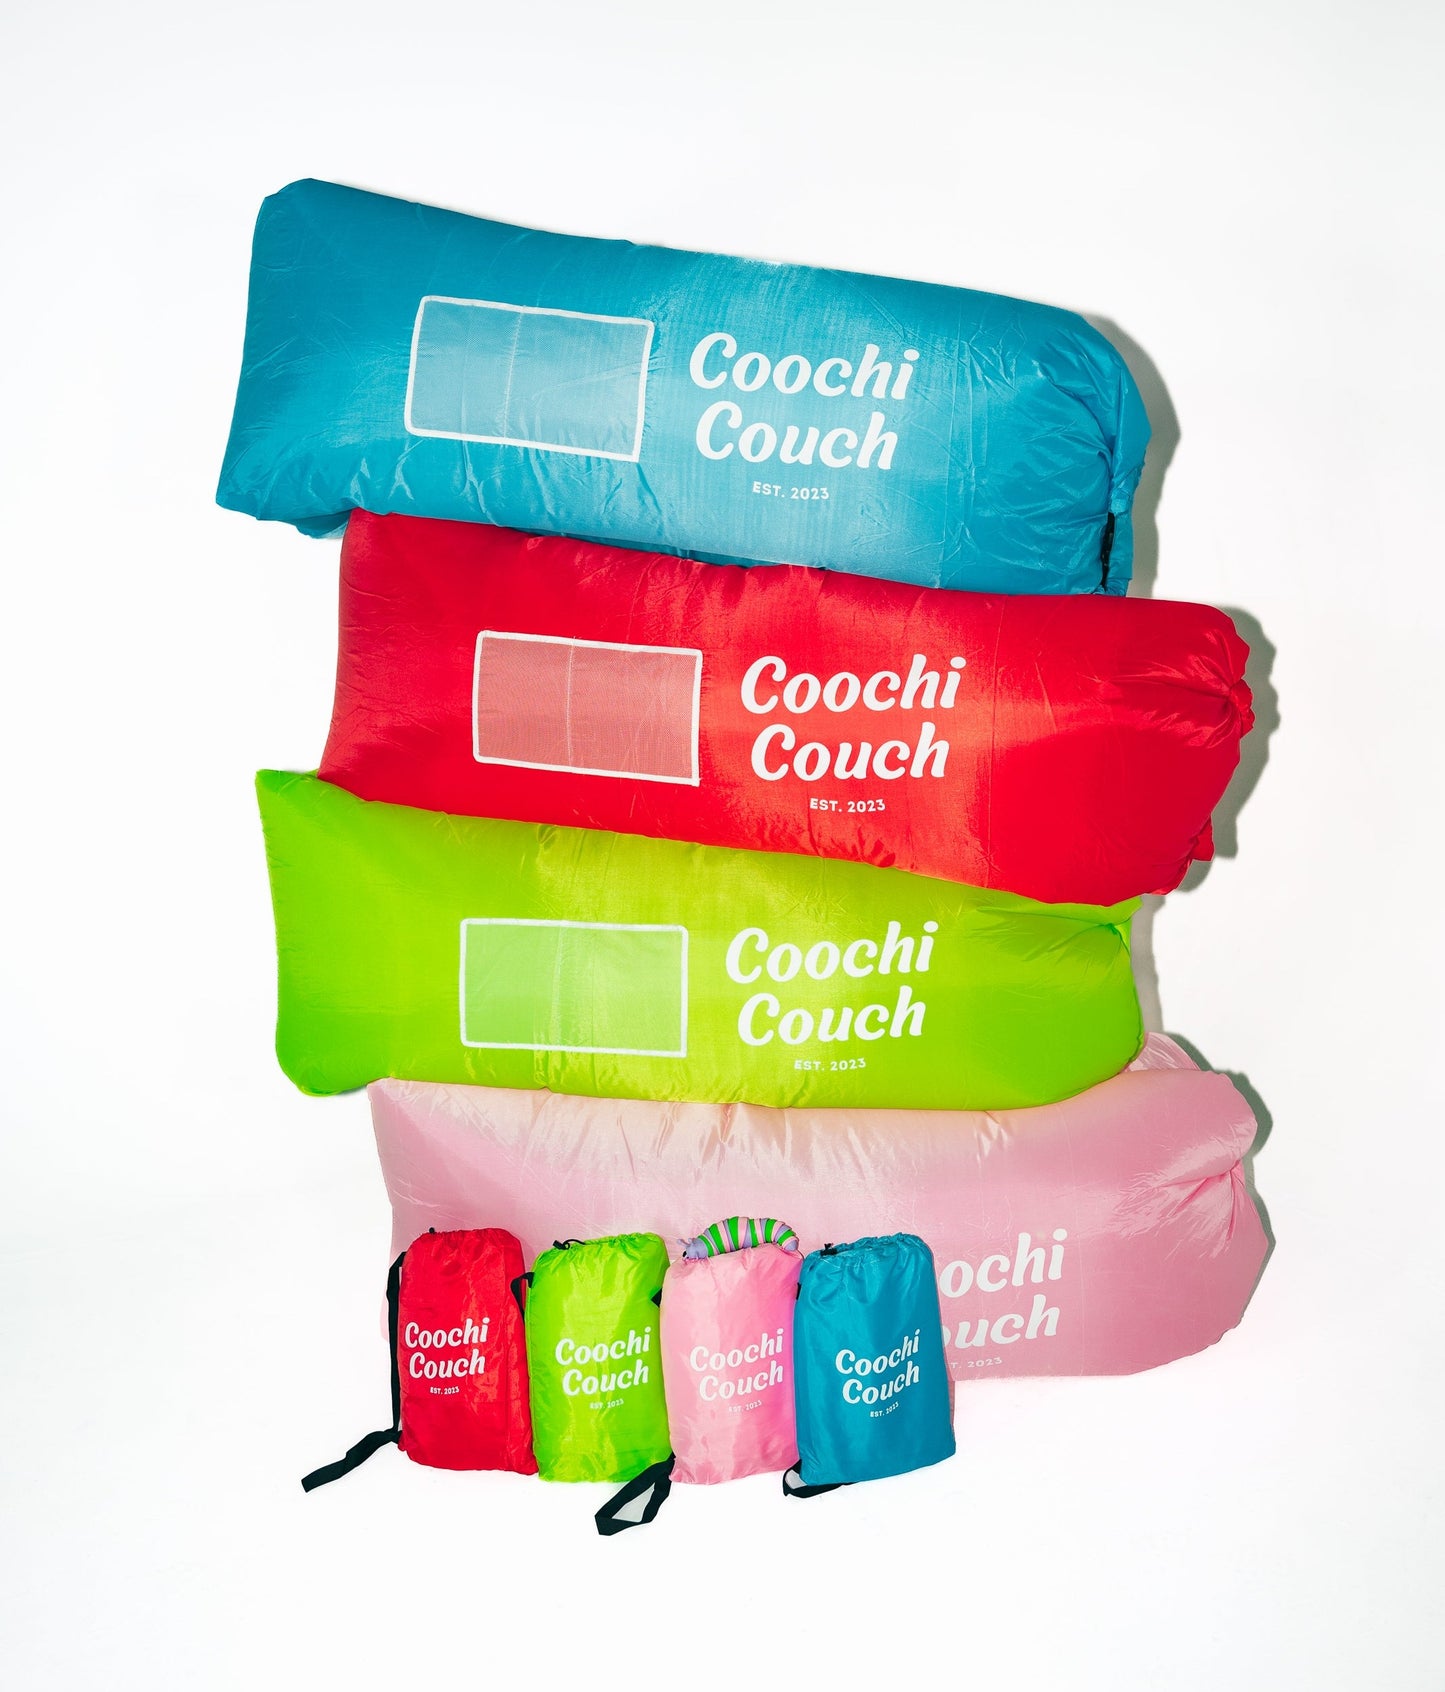 Coochi Couch